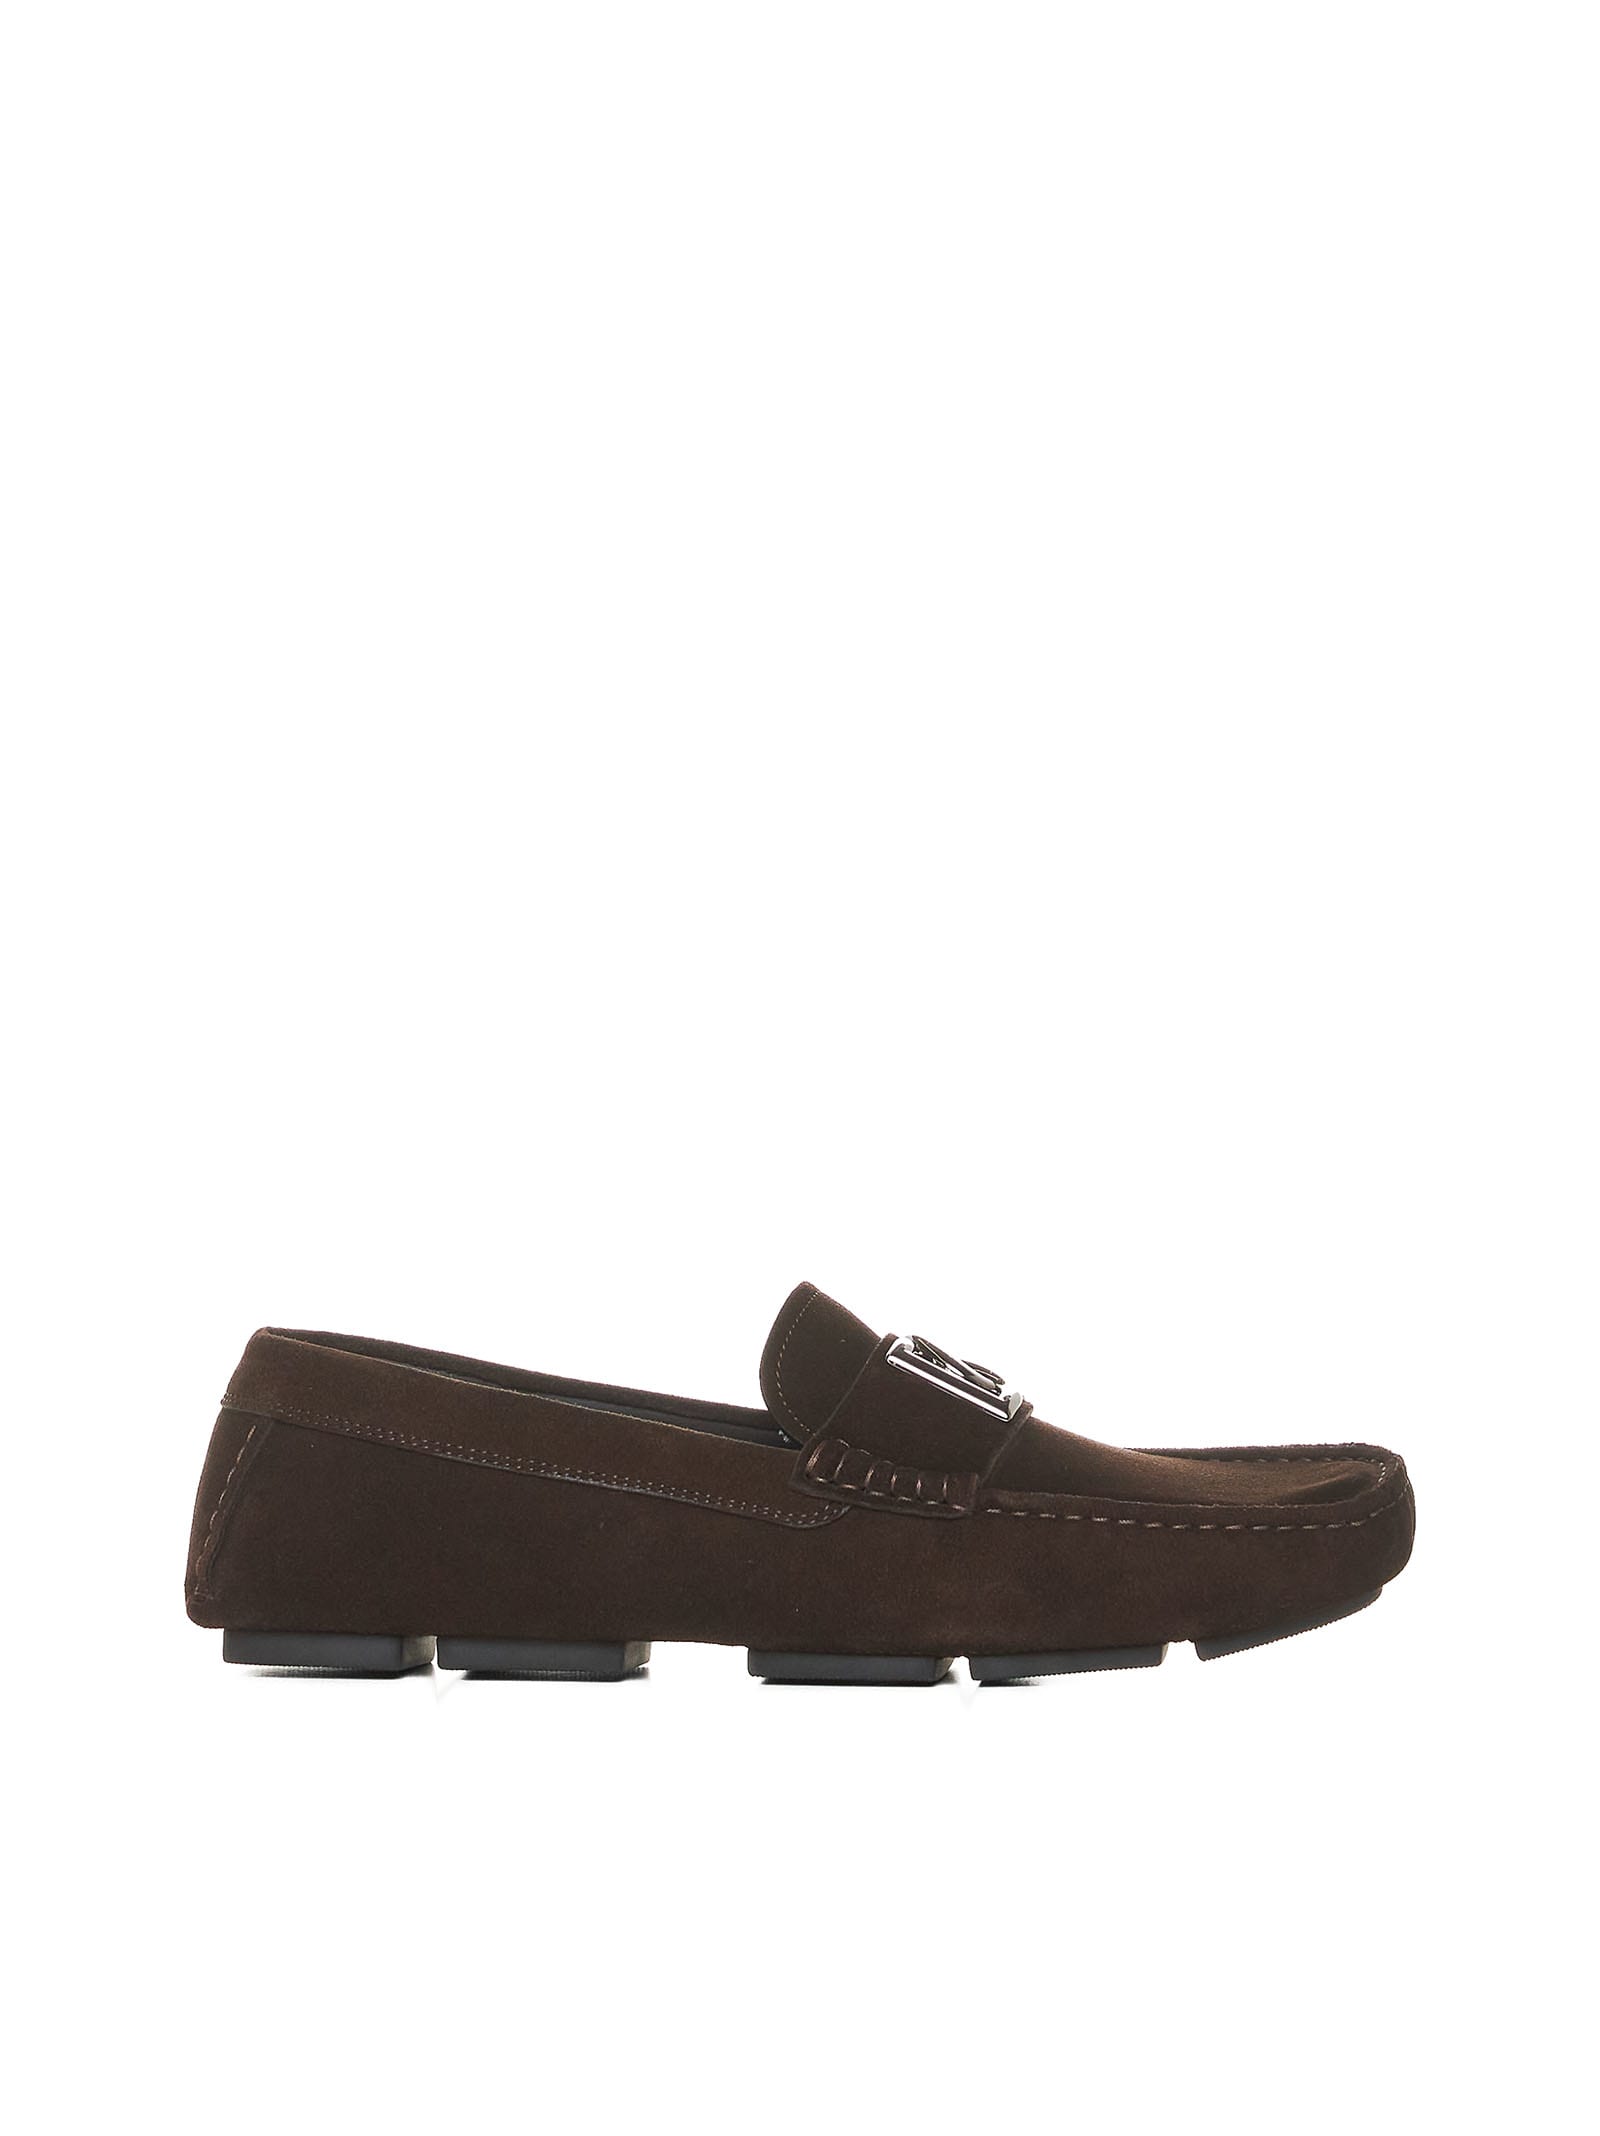 DOLCE & GABBANA EBONY COLOR SUEDE LOAFERS